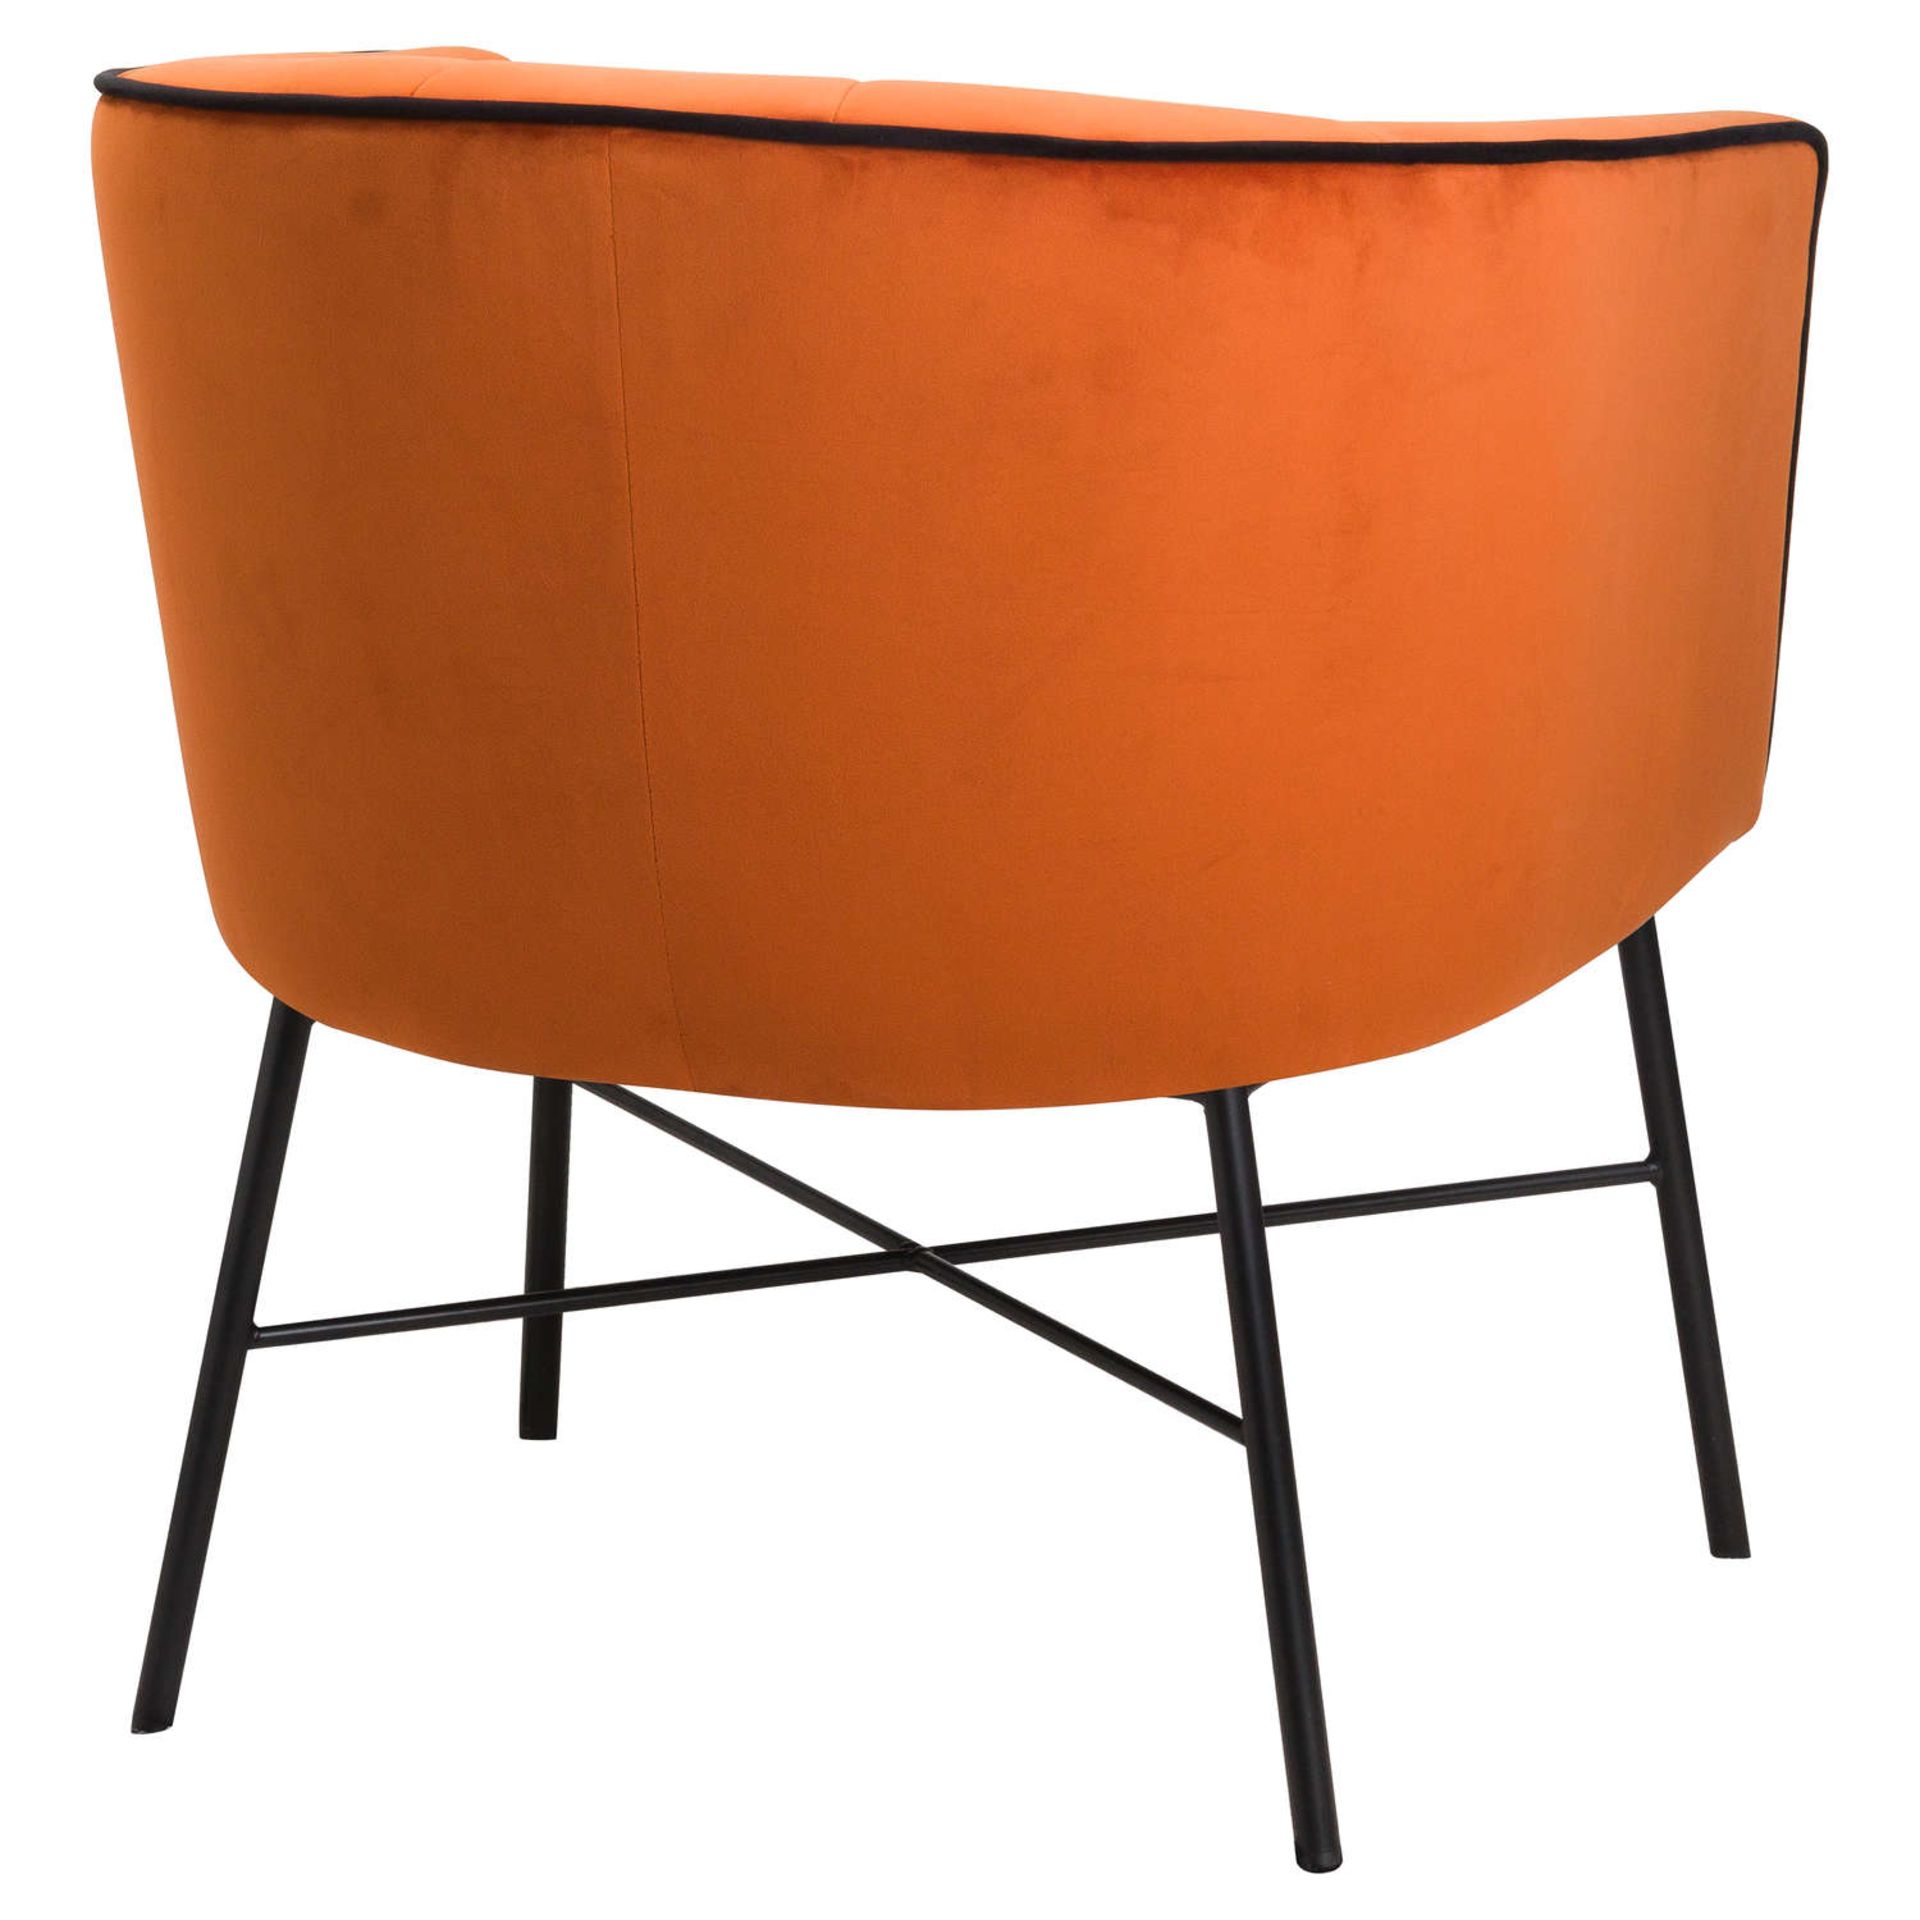 Rust Velvet Urban Tub Chair, this is a large tub chair making it a practical and cosy addition to - Image 3 of 3